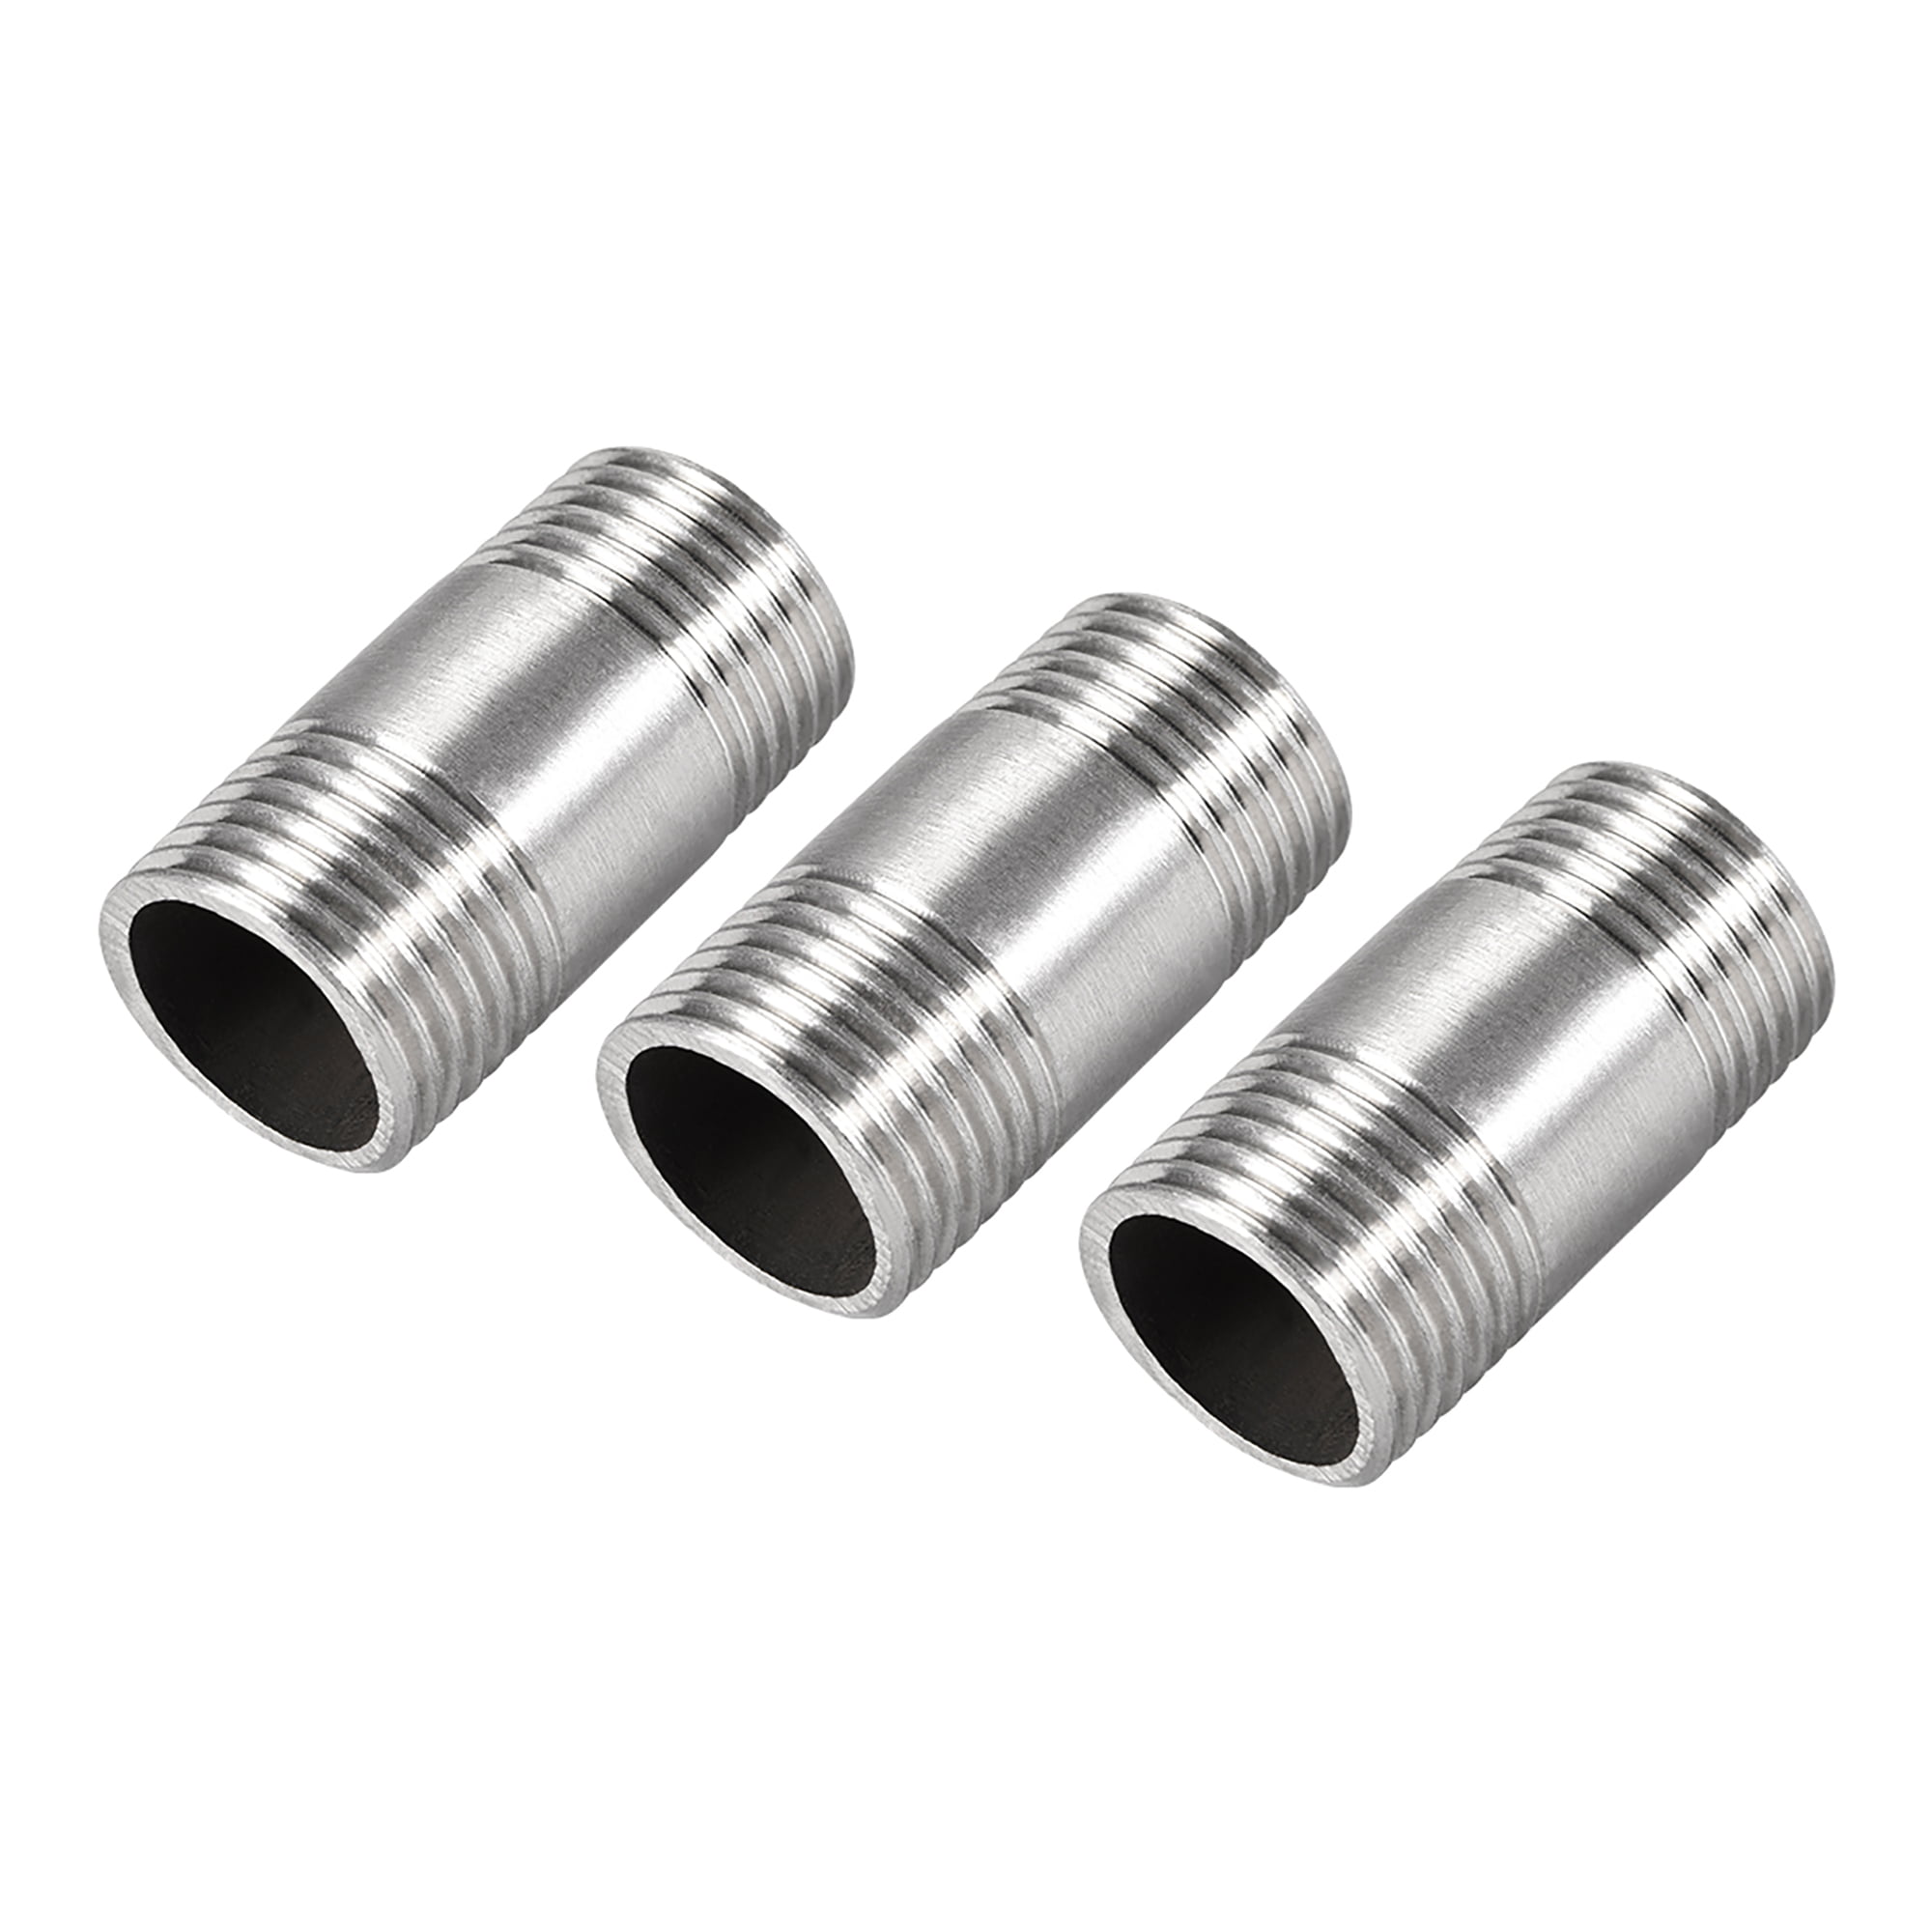 uxcell Stainless Steel 304 Cast Pipe Fittings Coupling 1/4 X 1/4 G Female 3pcs 